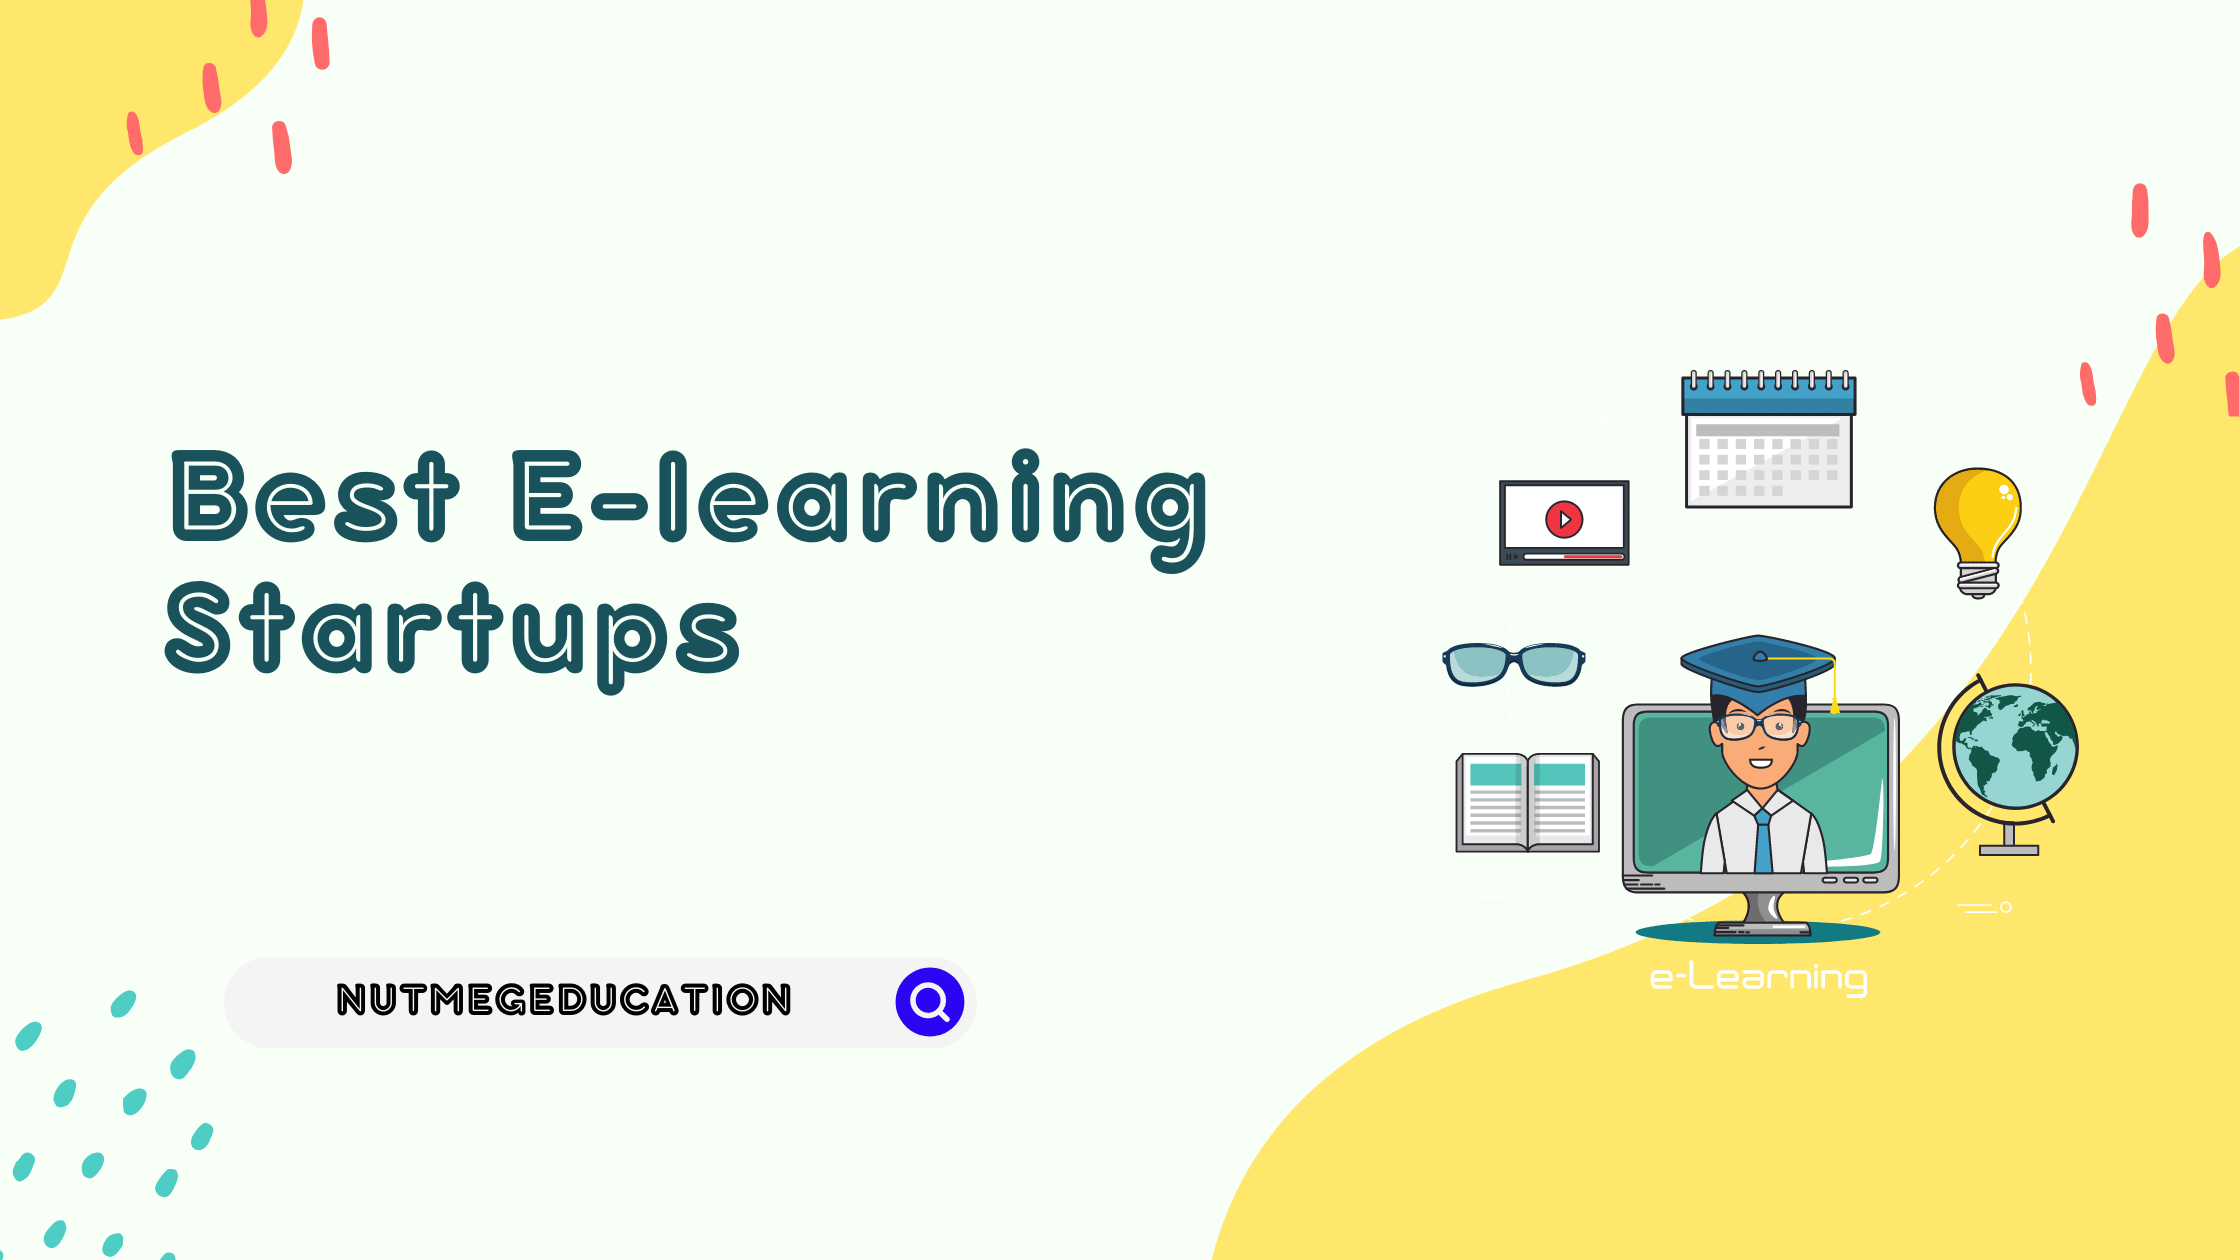 Best e-learning Startups - NutMegEducation